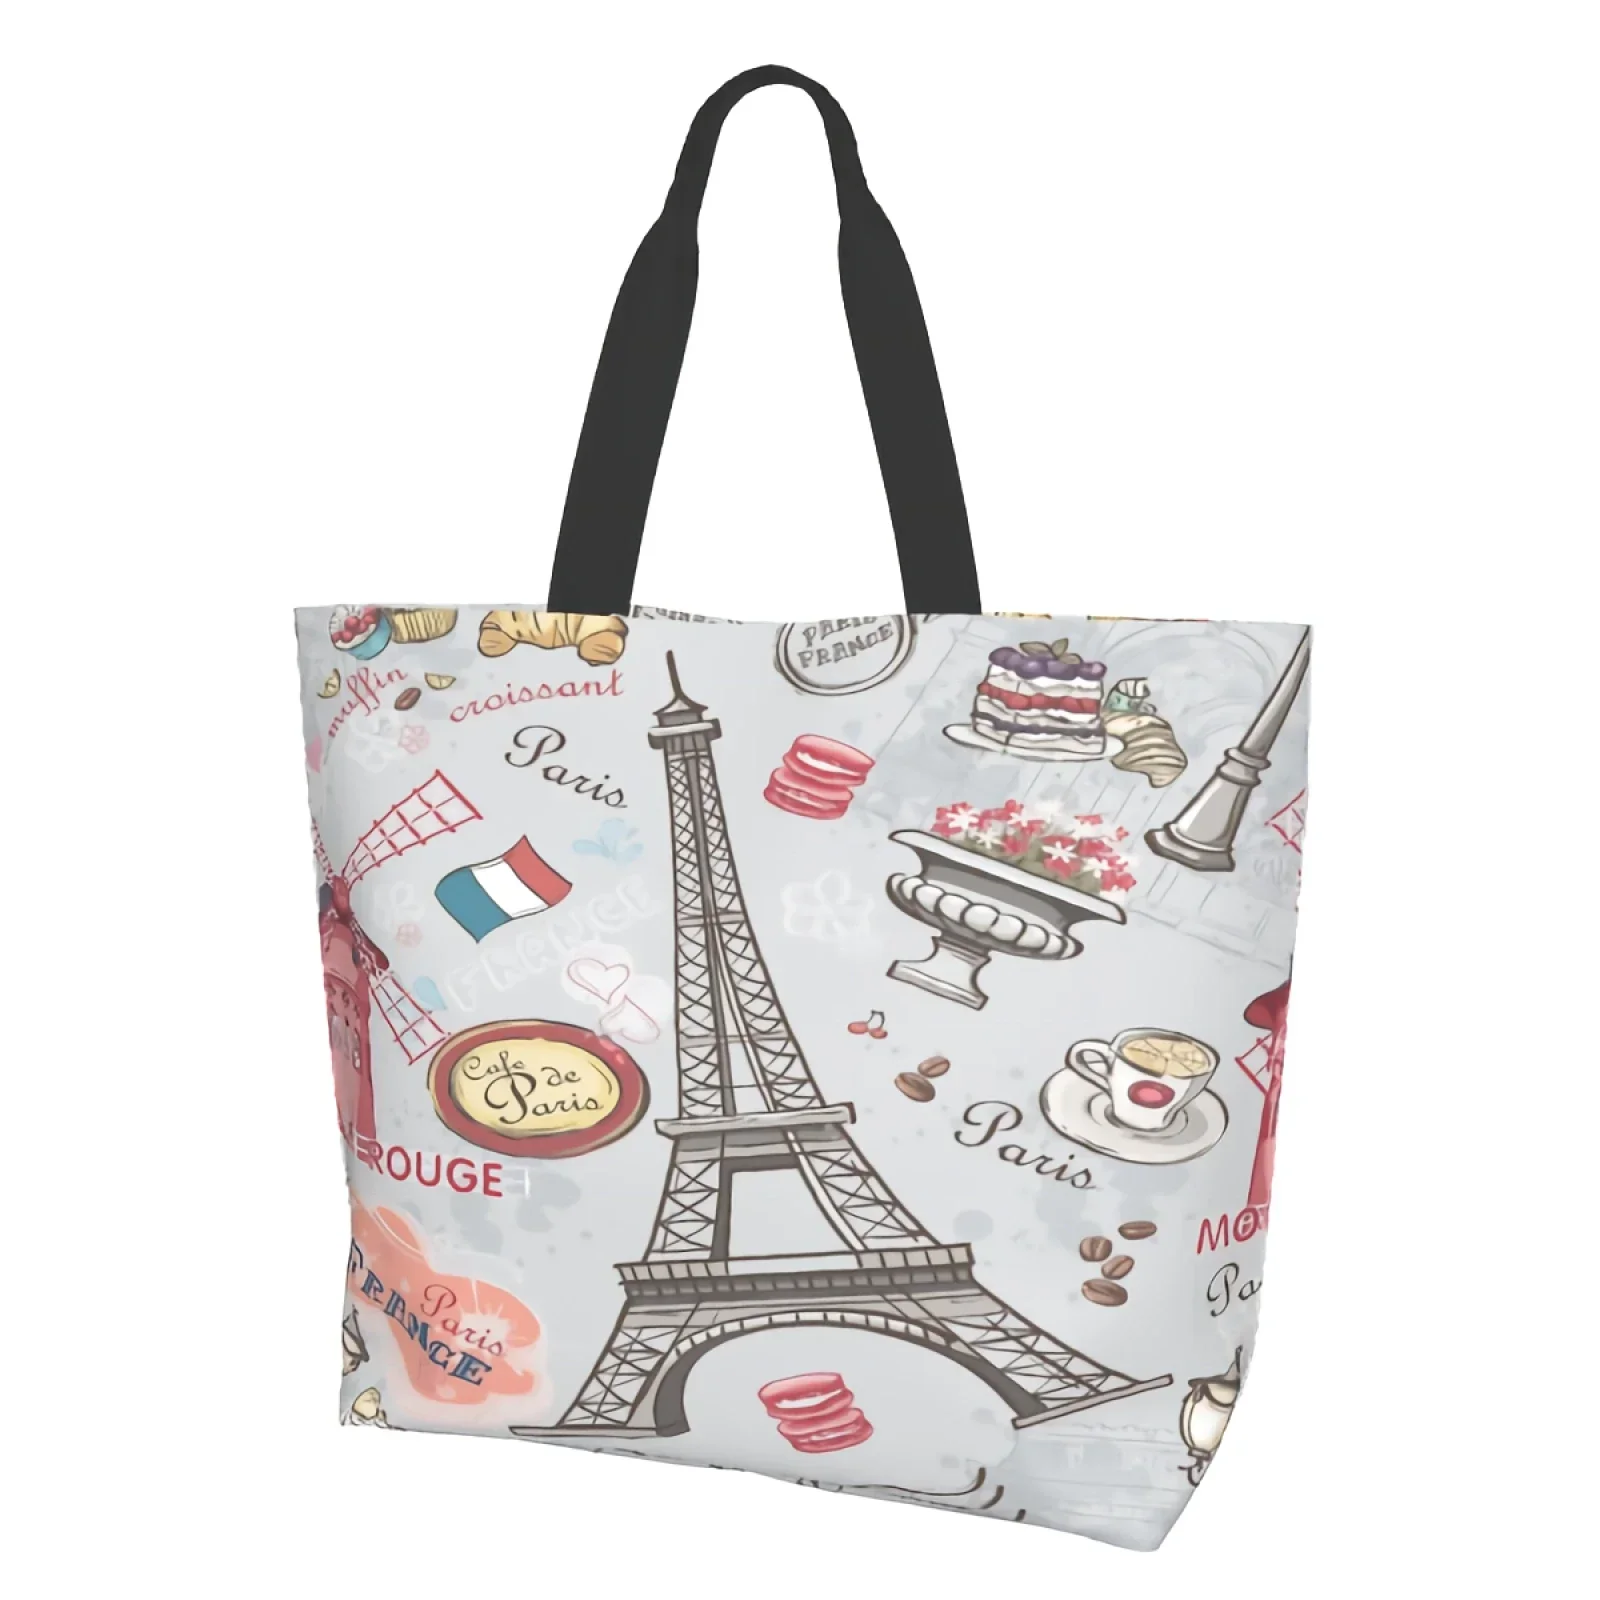 

Eiffel Tower Extra Large Grocery Bag Paris Gray Reusable Tote Bag Shopping Travel Storage Tote Lightweight Washable Shoulder Bag